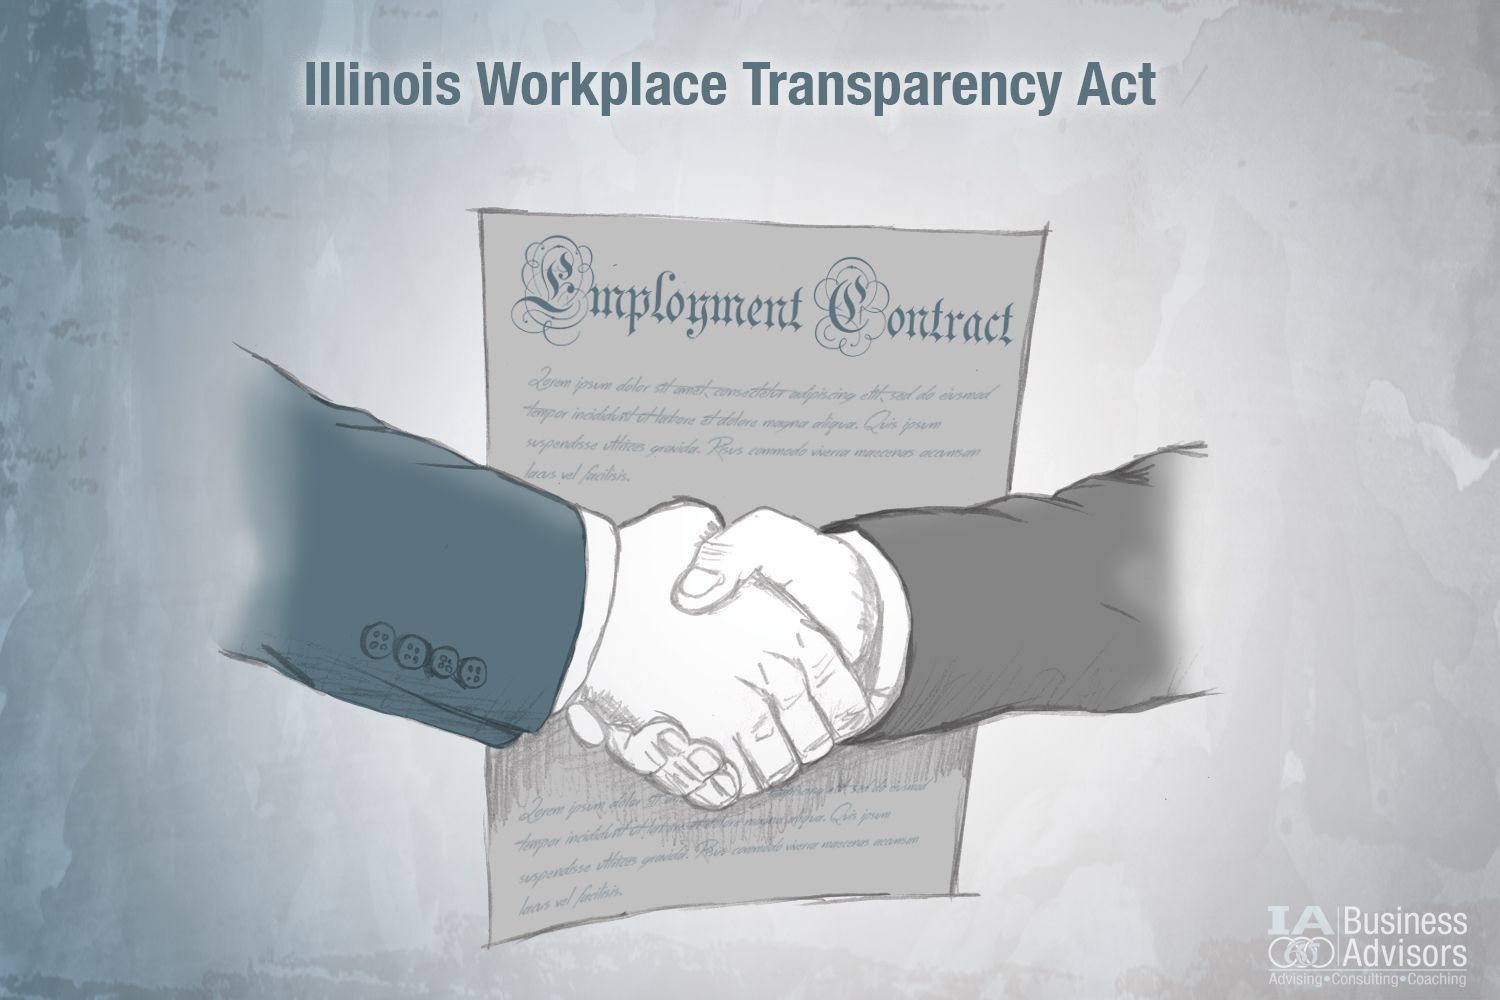 Illinois Workplace Transparency Act